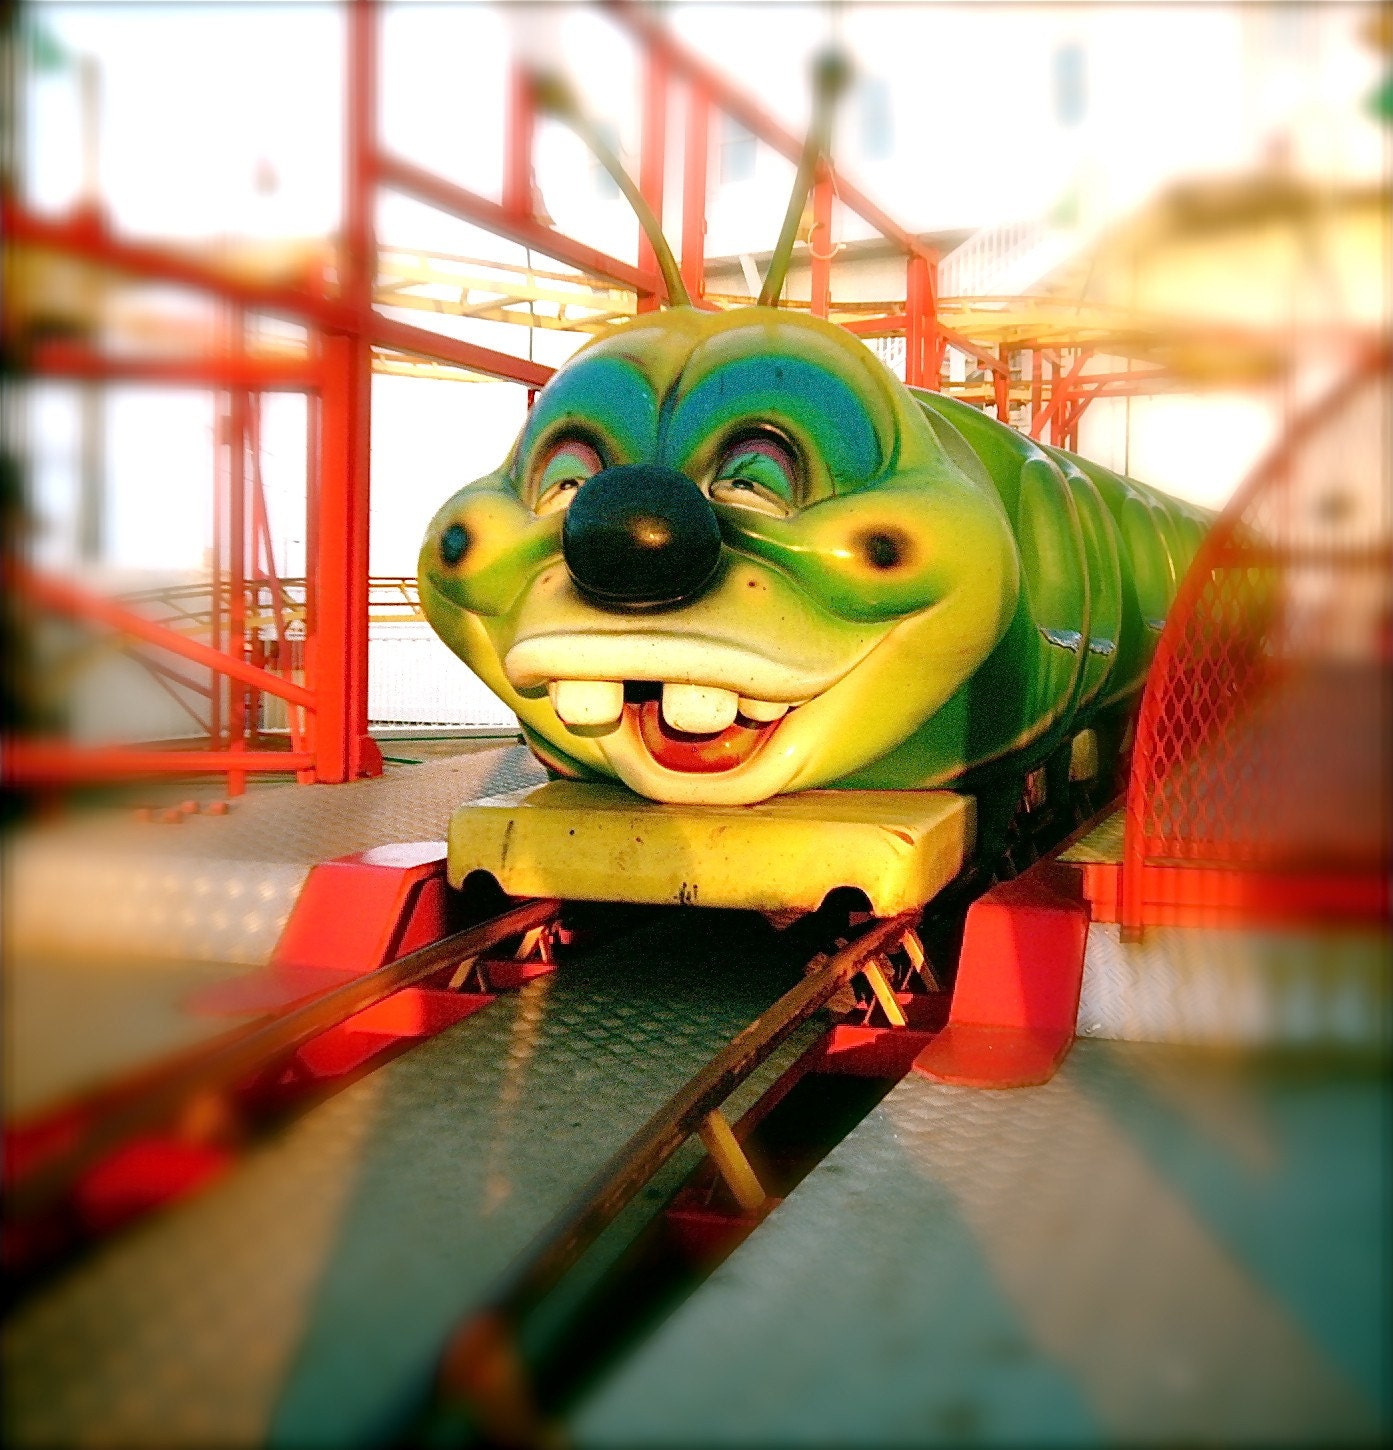 Toothy - smiling caterpillar carnival ride Fine Art Carnival Photograph, Handmade Philly team, 8x8 print - heatherexley